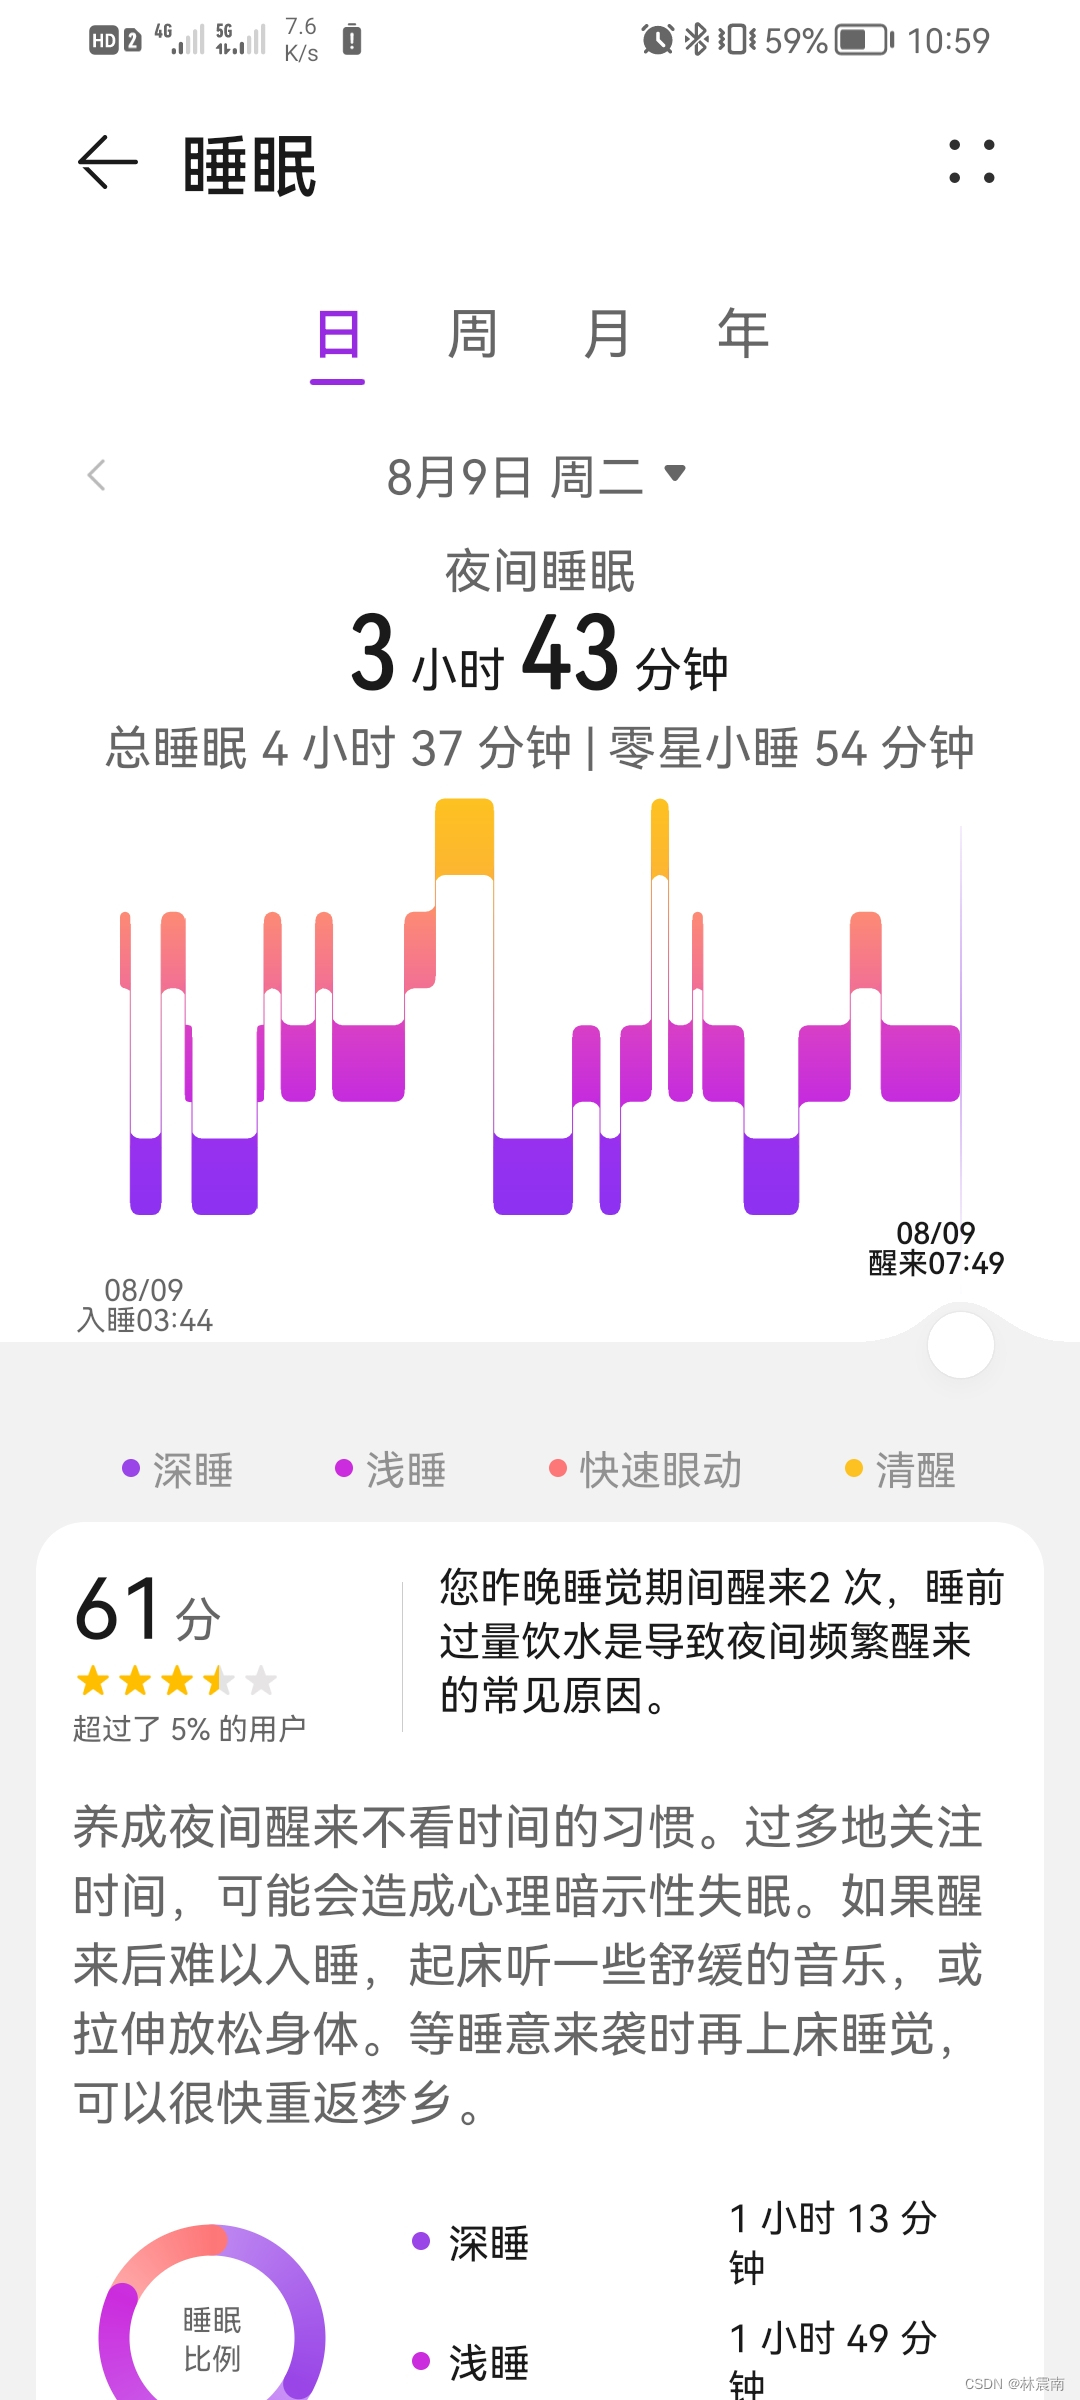 Today's sleep quality record 61 points